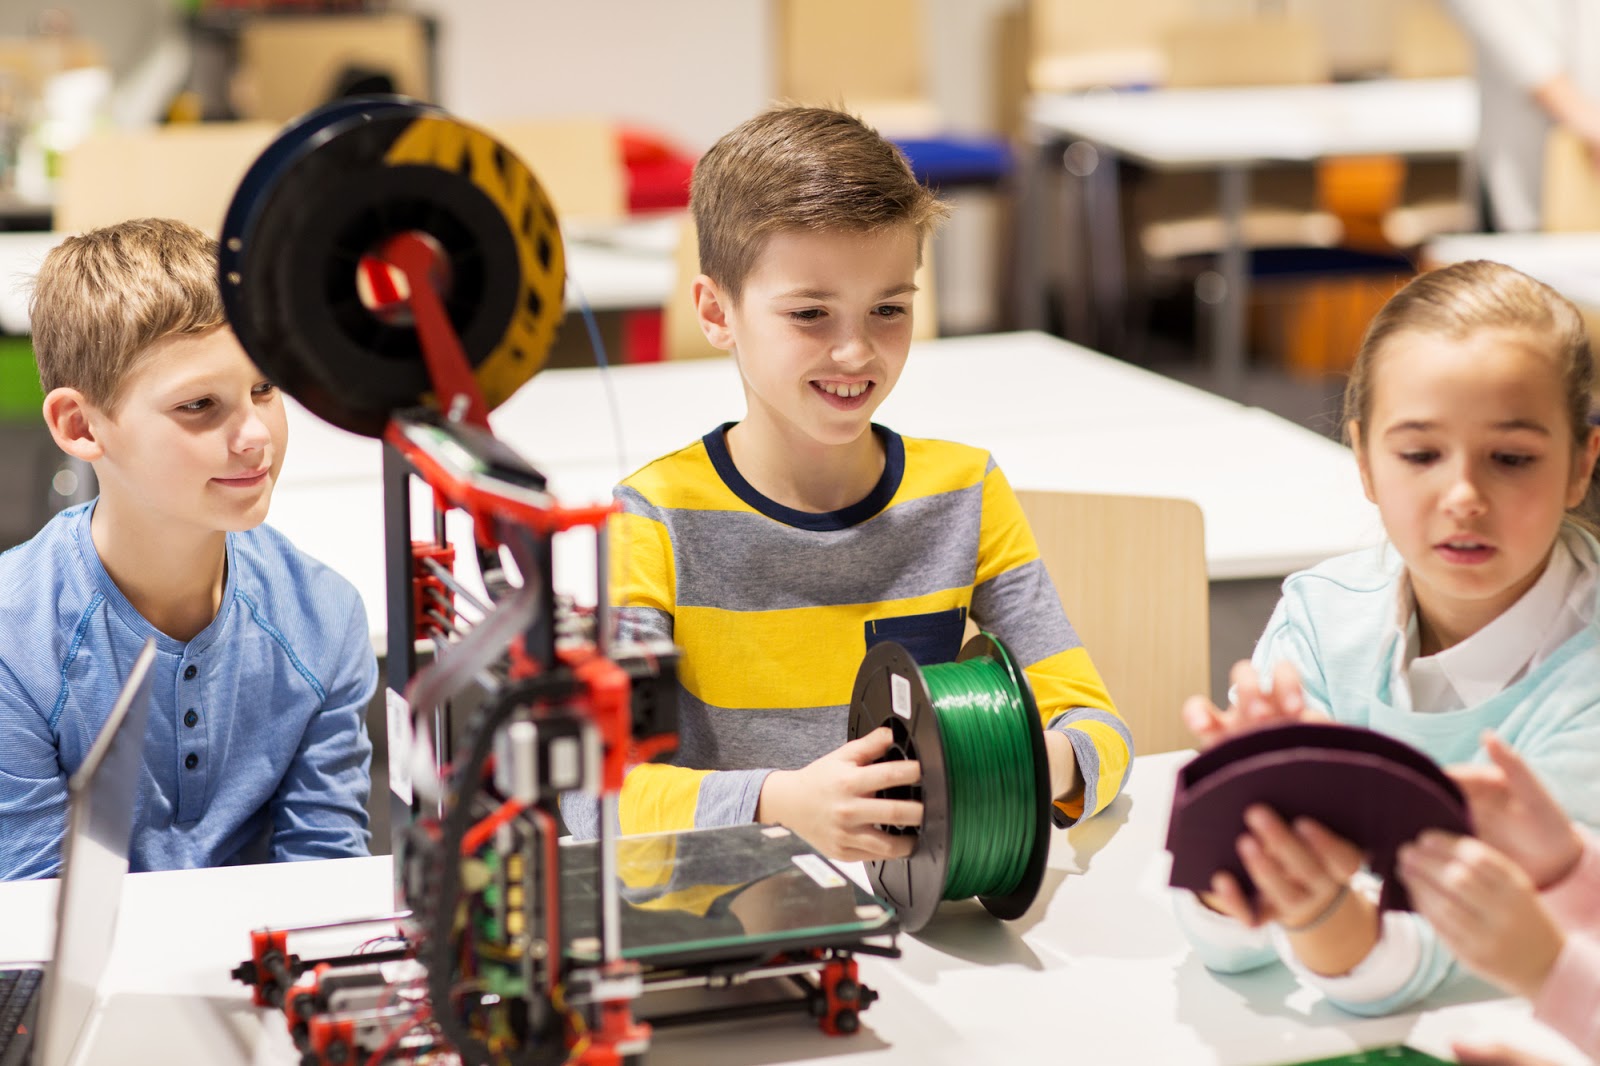 Three students working with a 3D printer